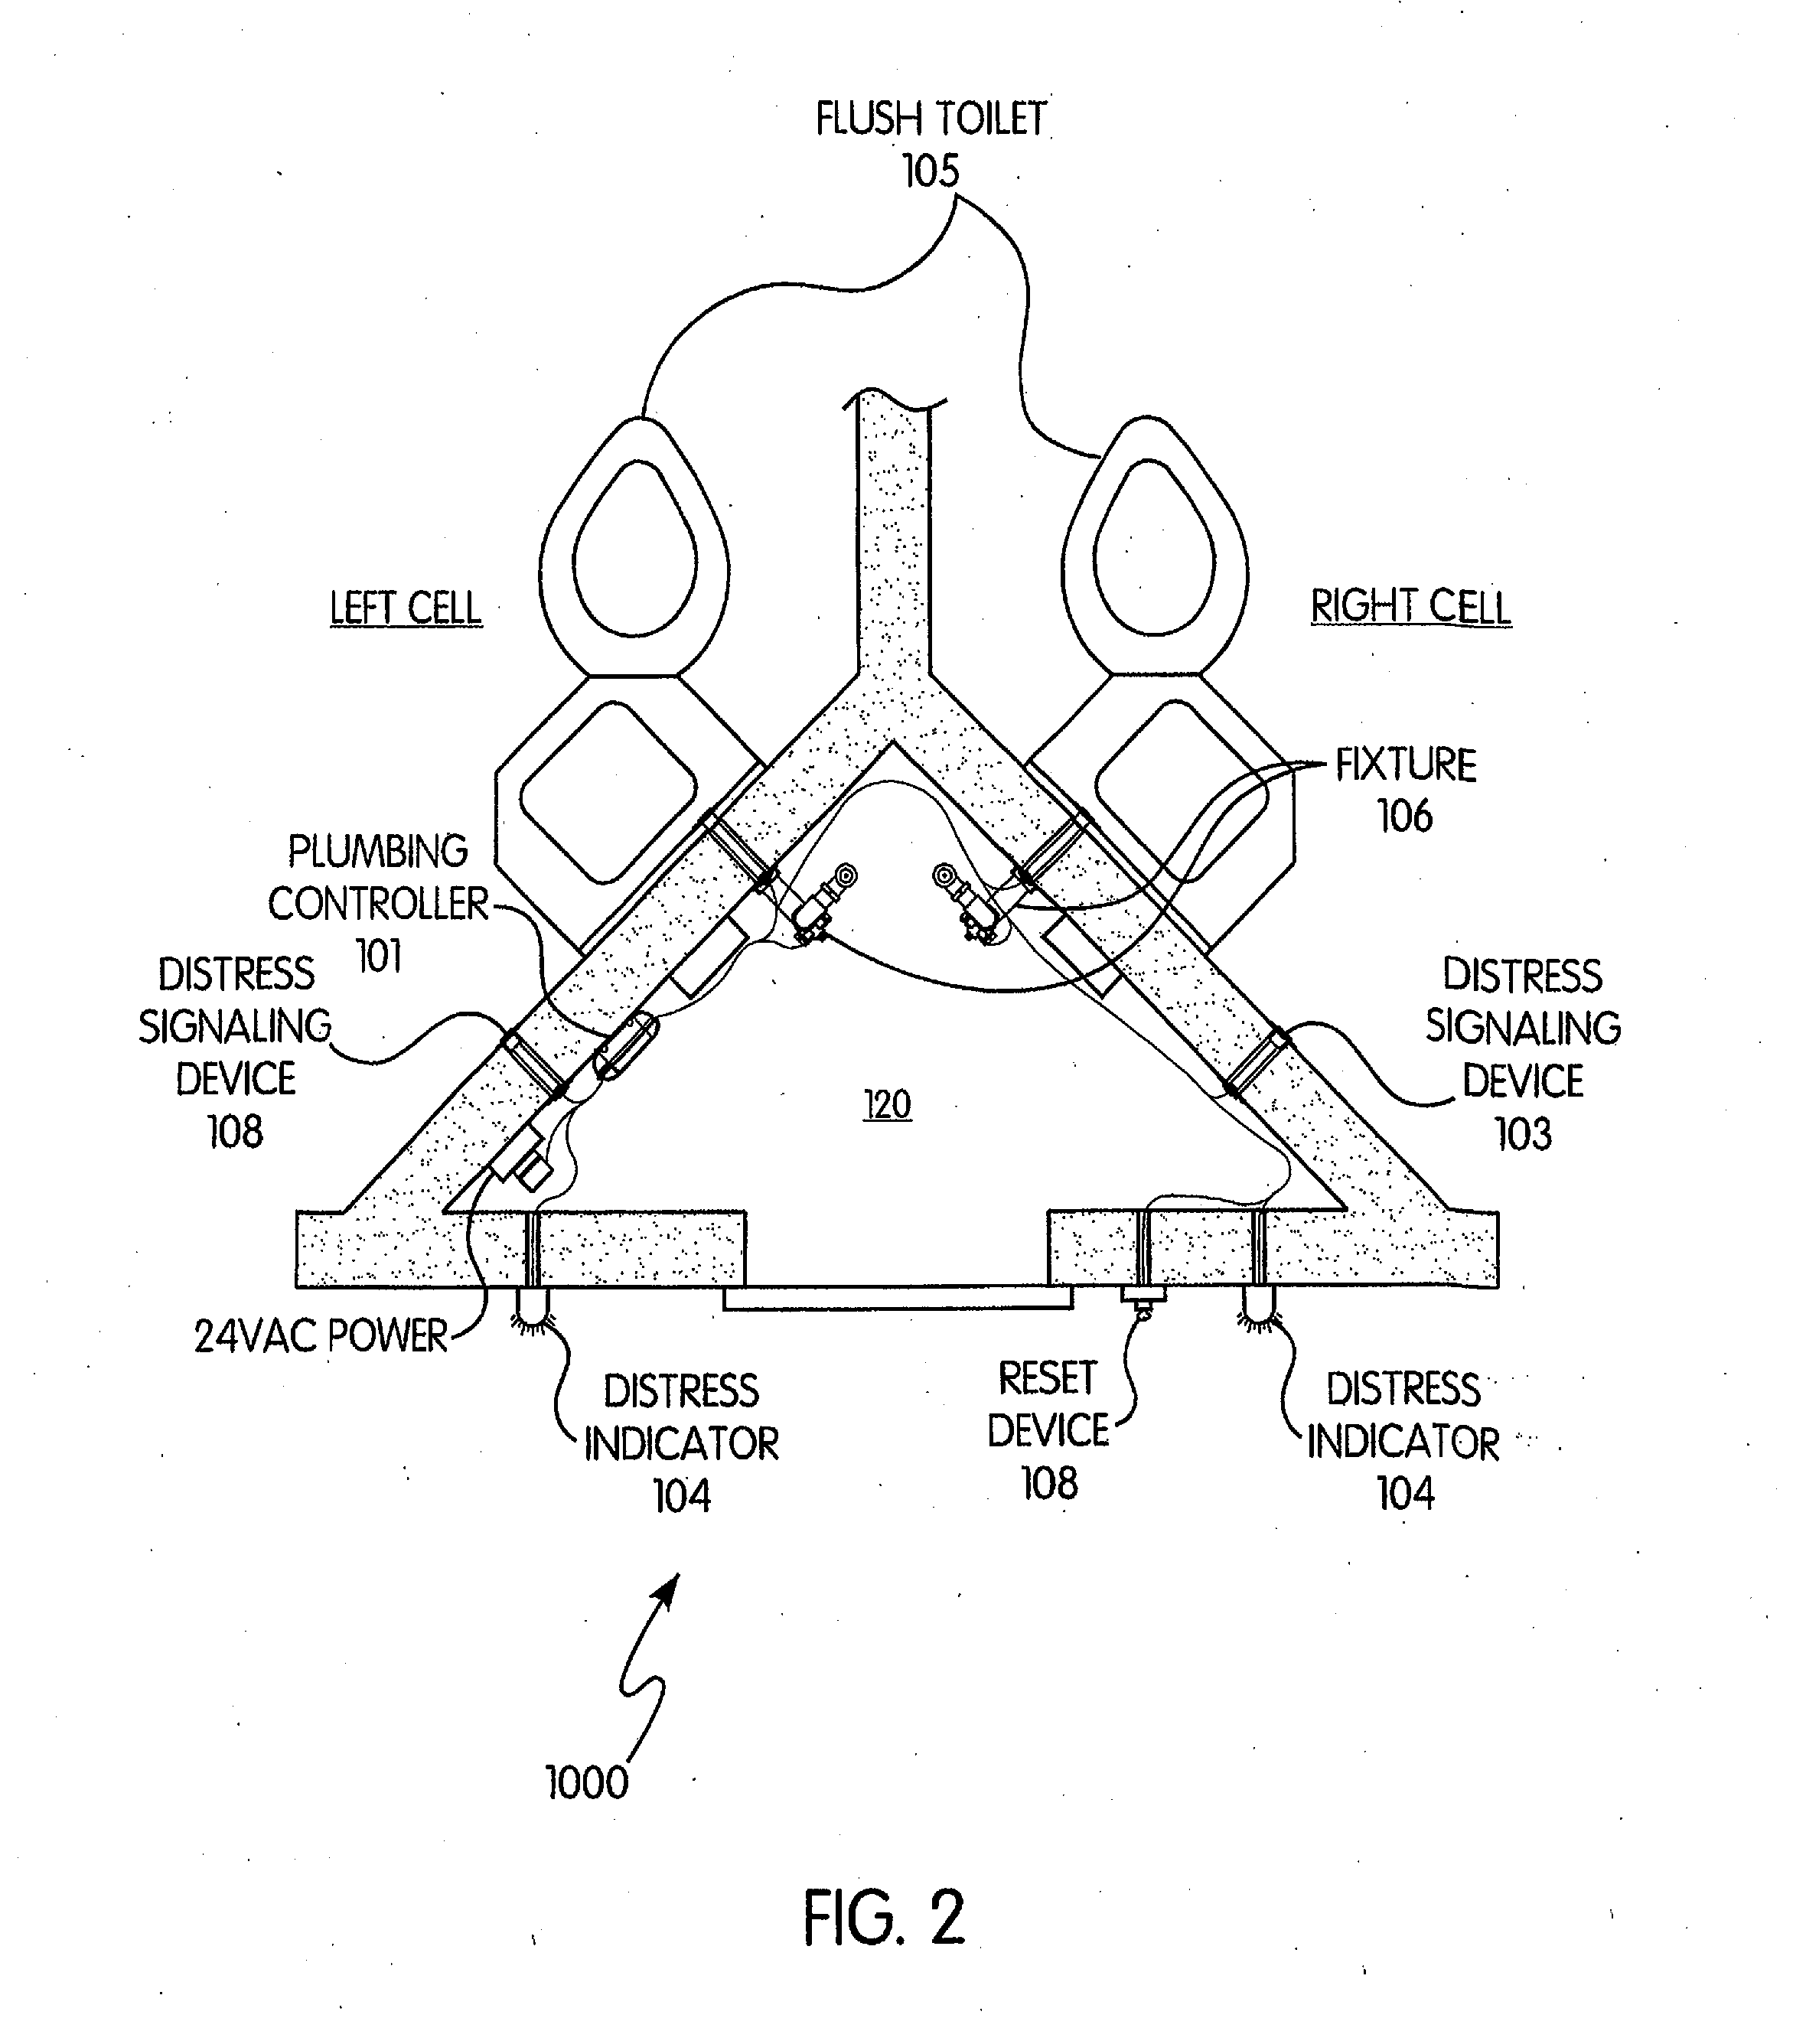 Plumbing Control System With Distress Signal